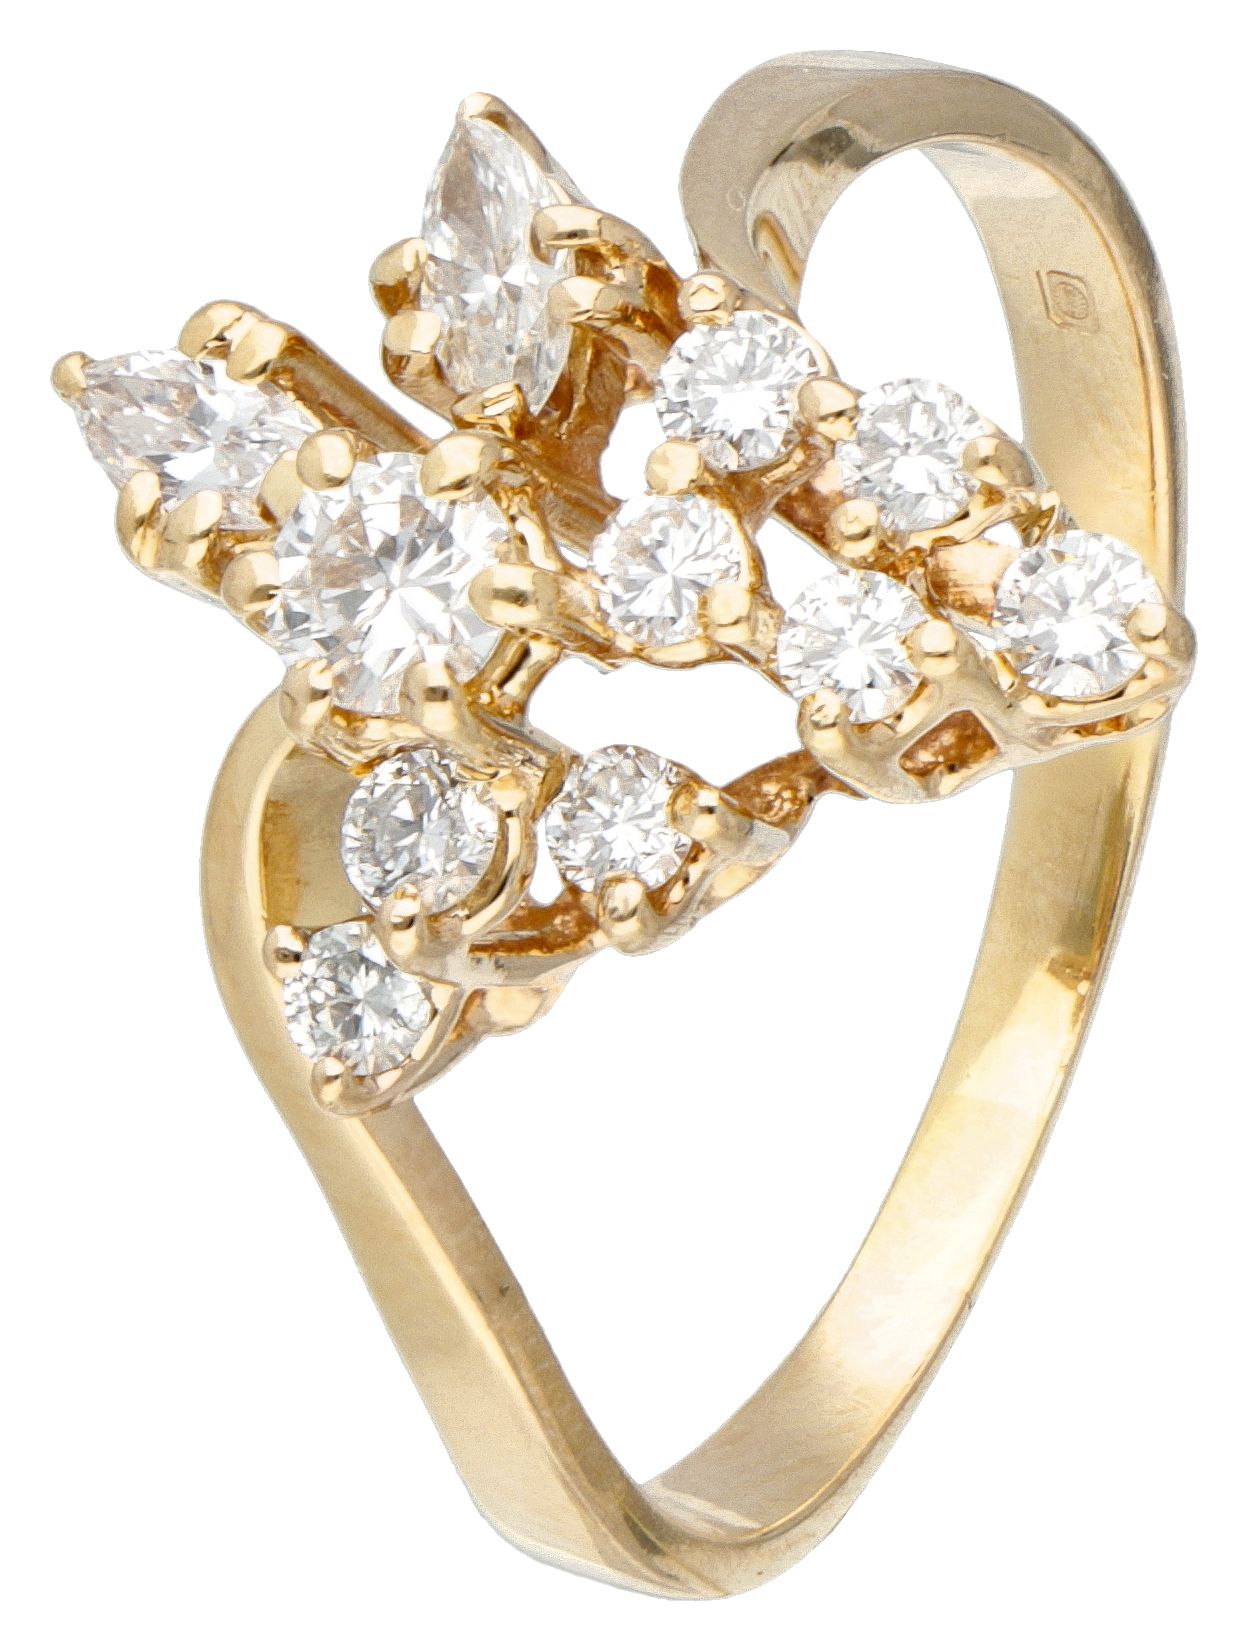 14K. Yellow gold ring set with approx. 0.55 ct. Diamond. Sellos: 585. Engastado &hellip;